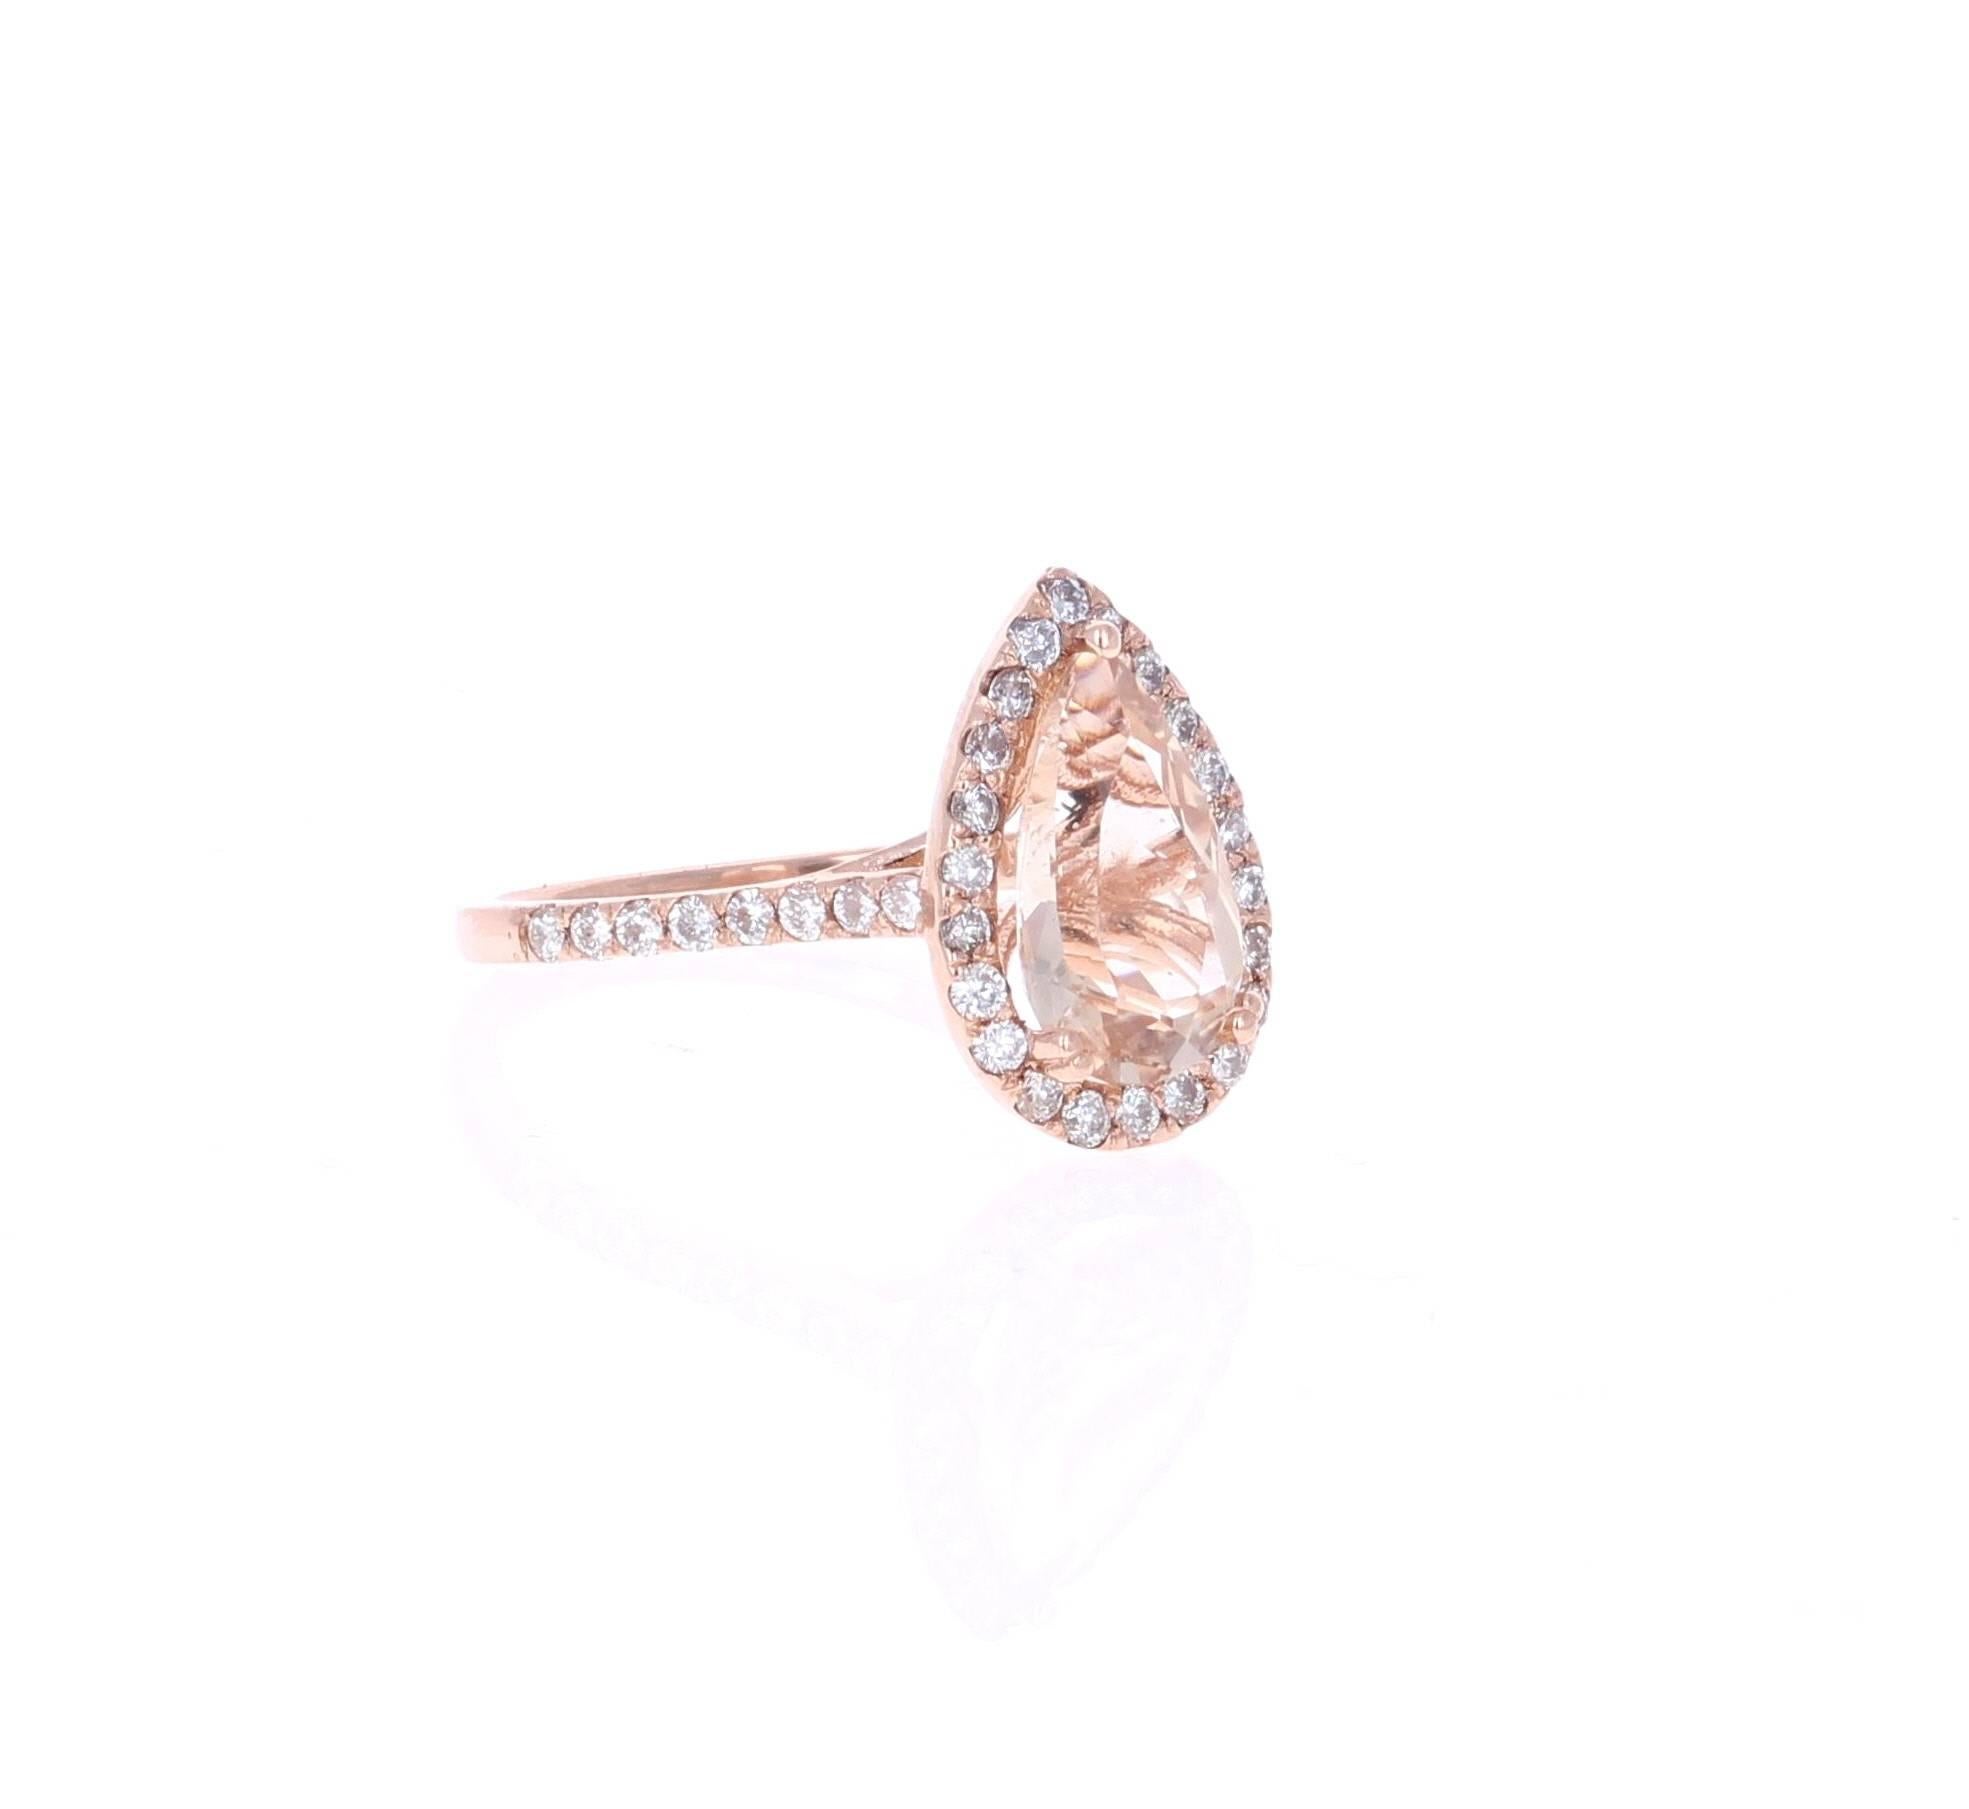 This gorgeous and classy Morganite Ring has a 2.08 Carat Pear Cut Morganite as its center and is surrounded by a Halo of 39 Round Cut Diamonds that weigh 0.62 carats. The clarity and color of the diamonds are SI-F.   The total carat weight of the